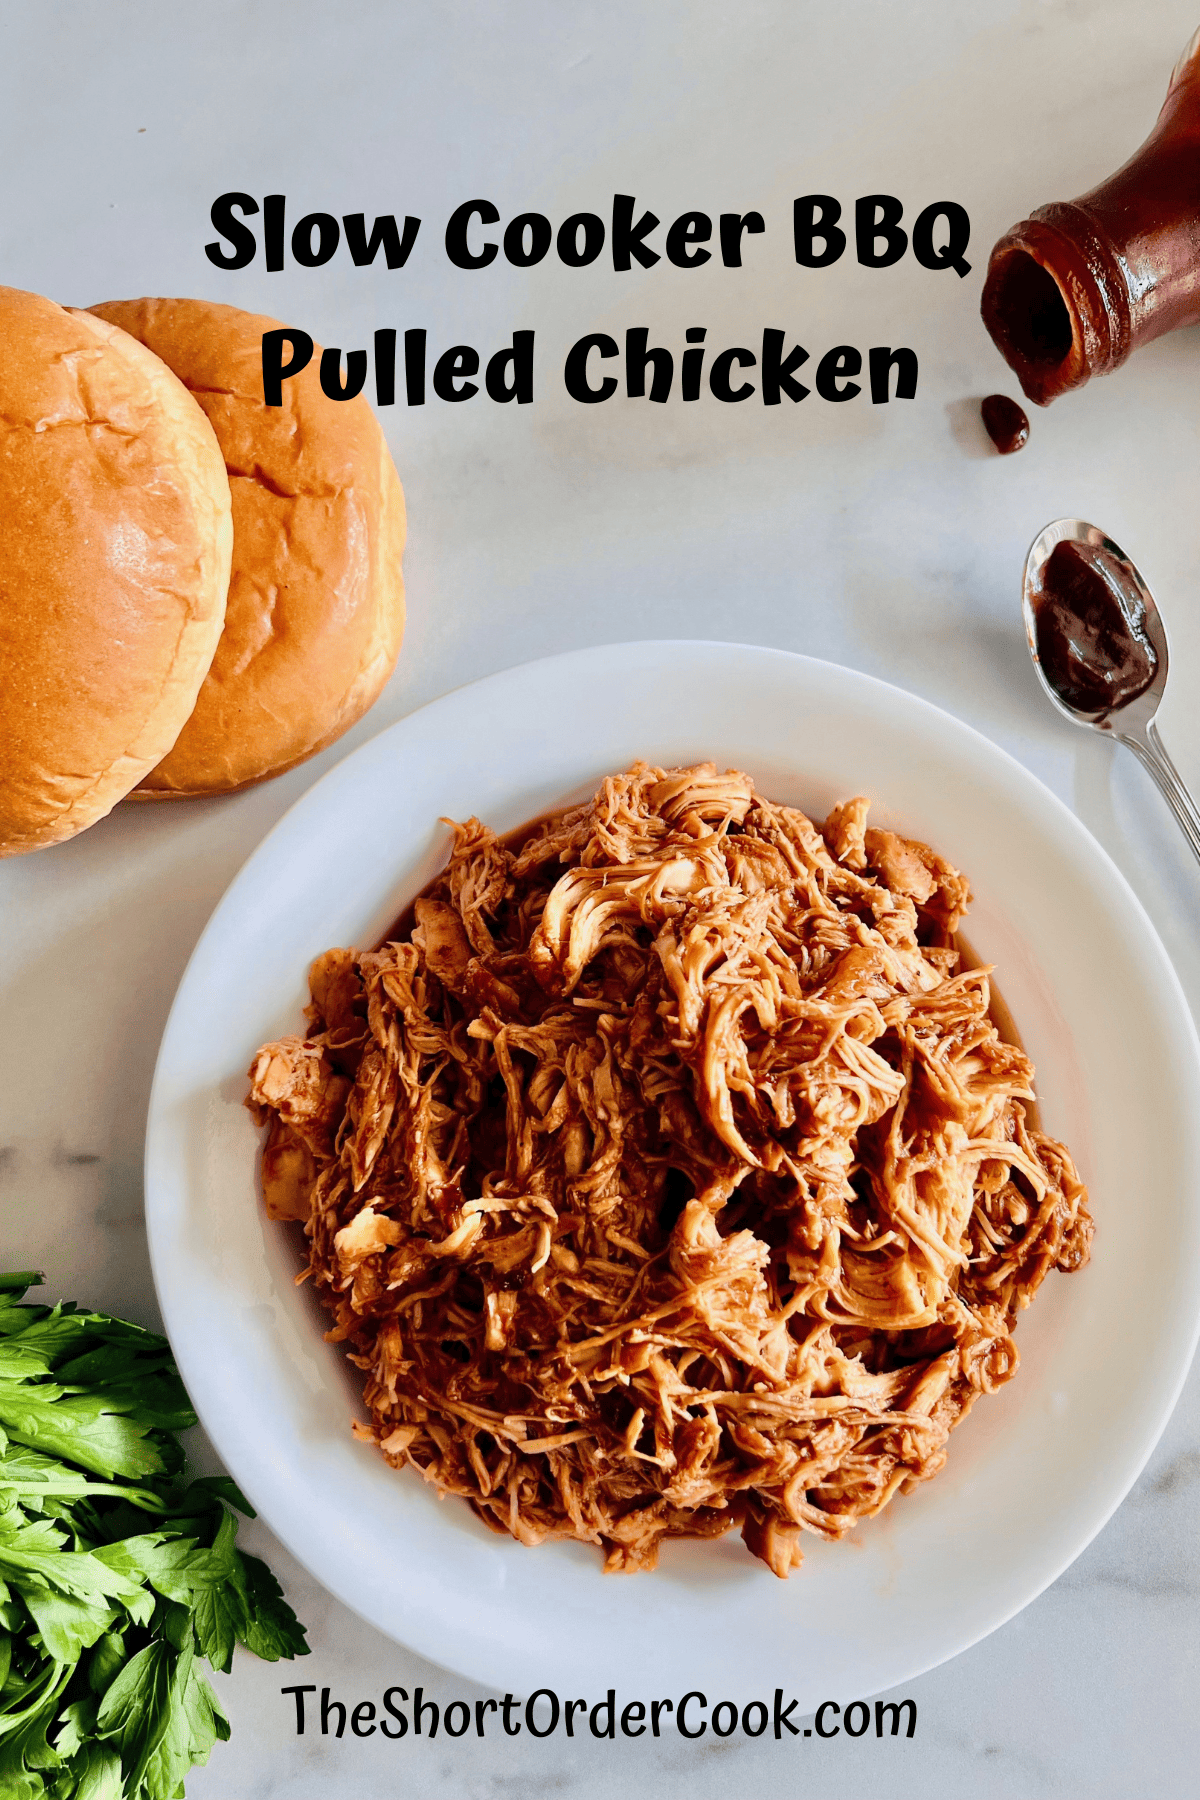 Slow Cooker BBQ Pulled Chicken in a bowl ready to serve next to hamburger buns, bbq sauce, & fresh parsley.